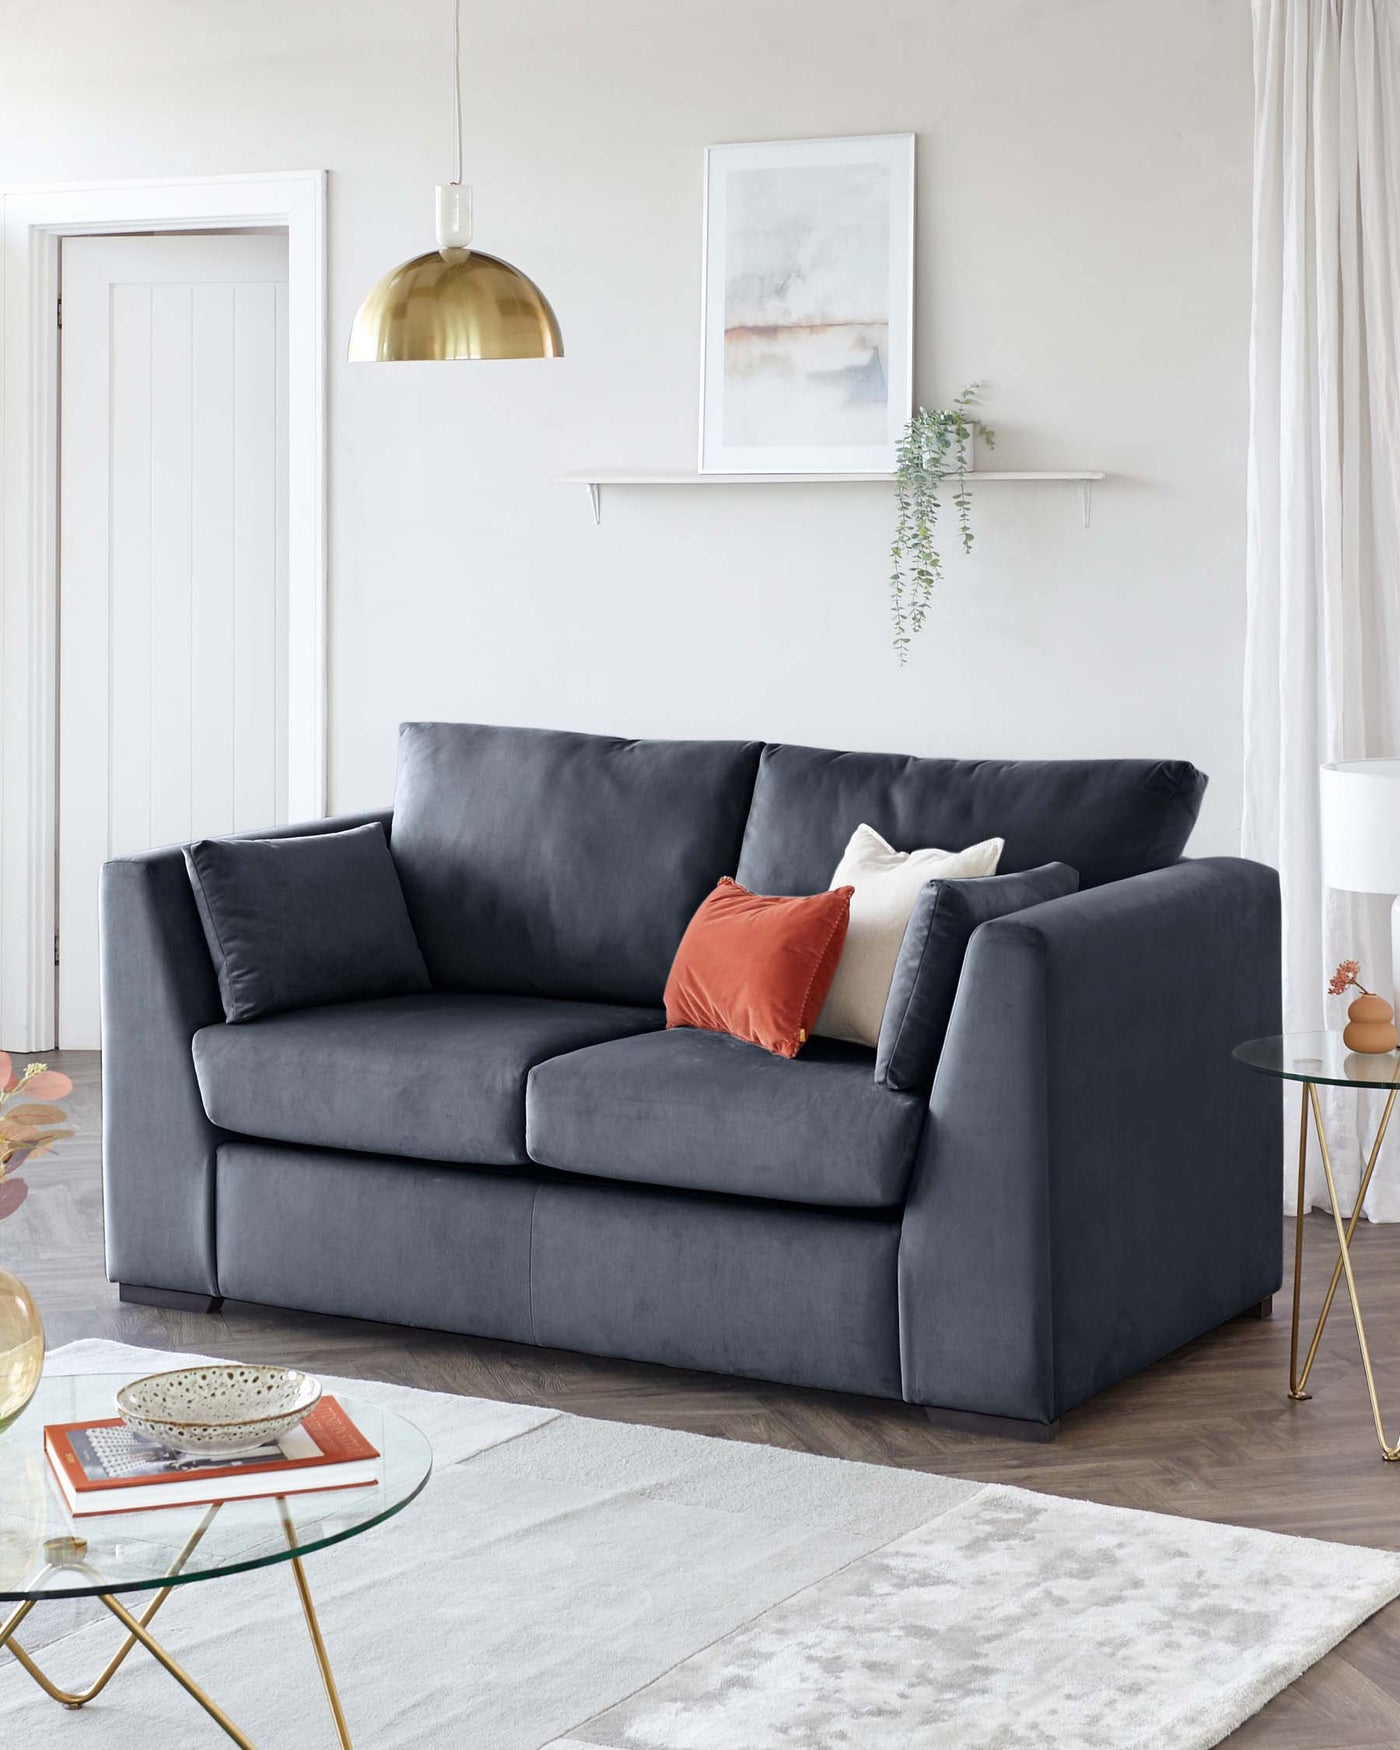 A contemporary charcoal grey upholstered sofa with plush cushions and a clean-lined silhouette. In front of the sofa is a modern round glass-top coffee table with a gold geometric frame. The room is accented with a white and grey patterned area rug.